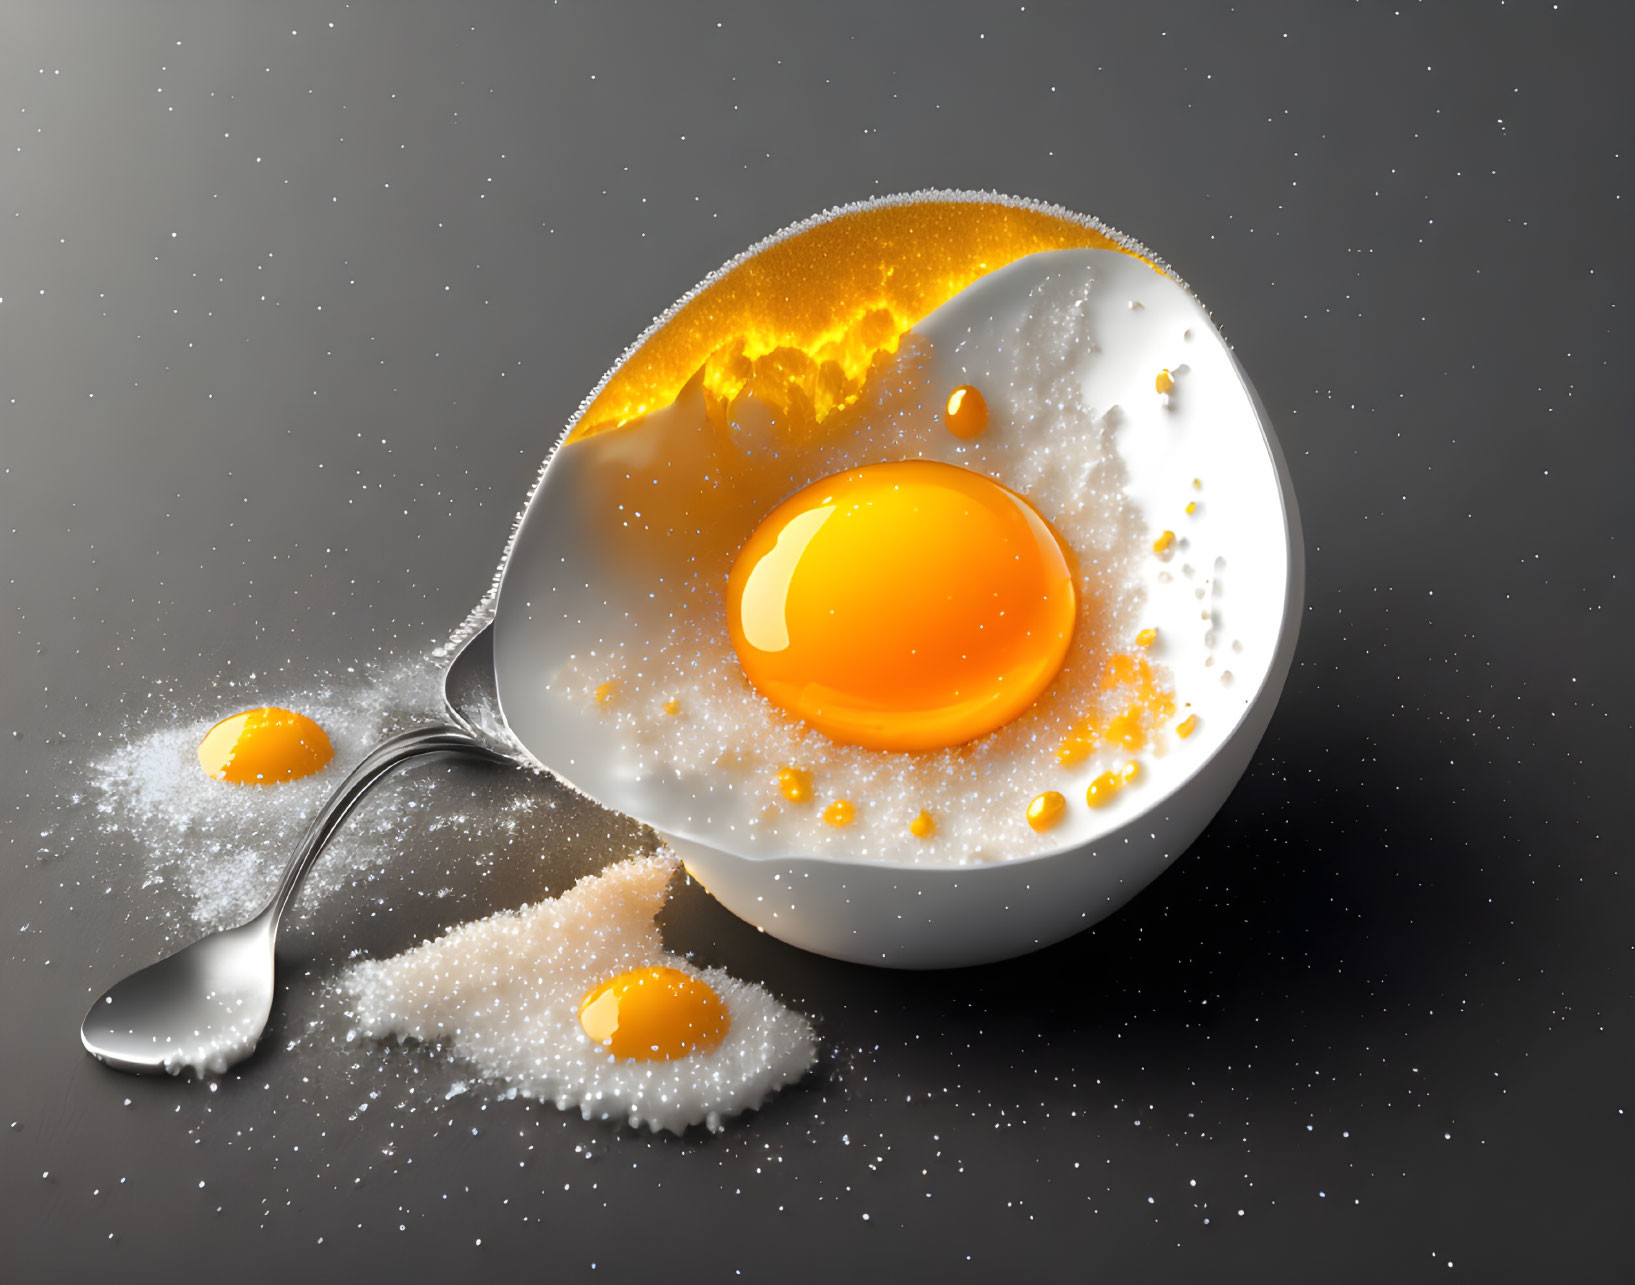 Digital Image: Spoon and Half Egg with Starry Night Sky Theme